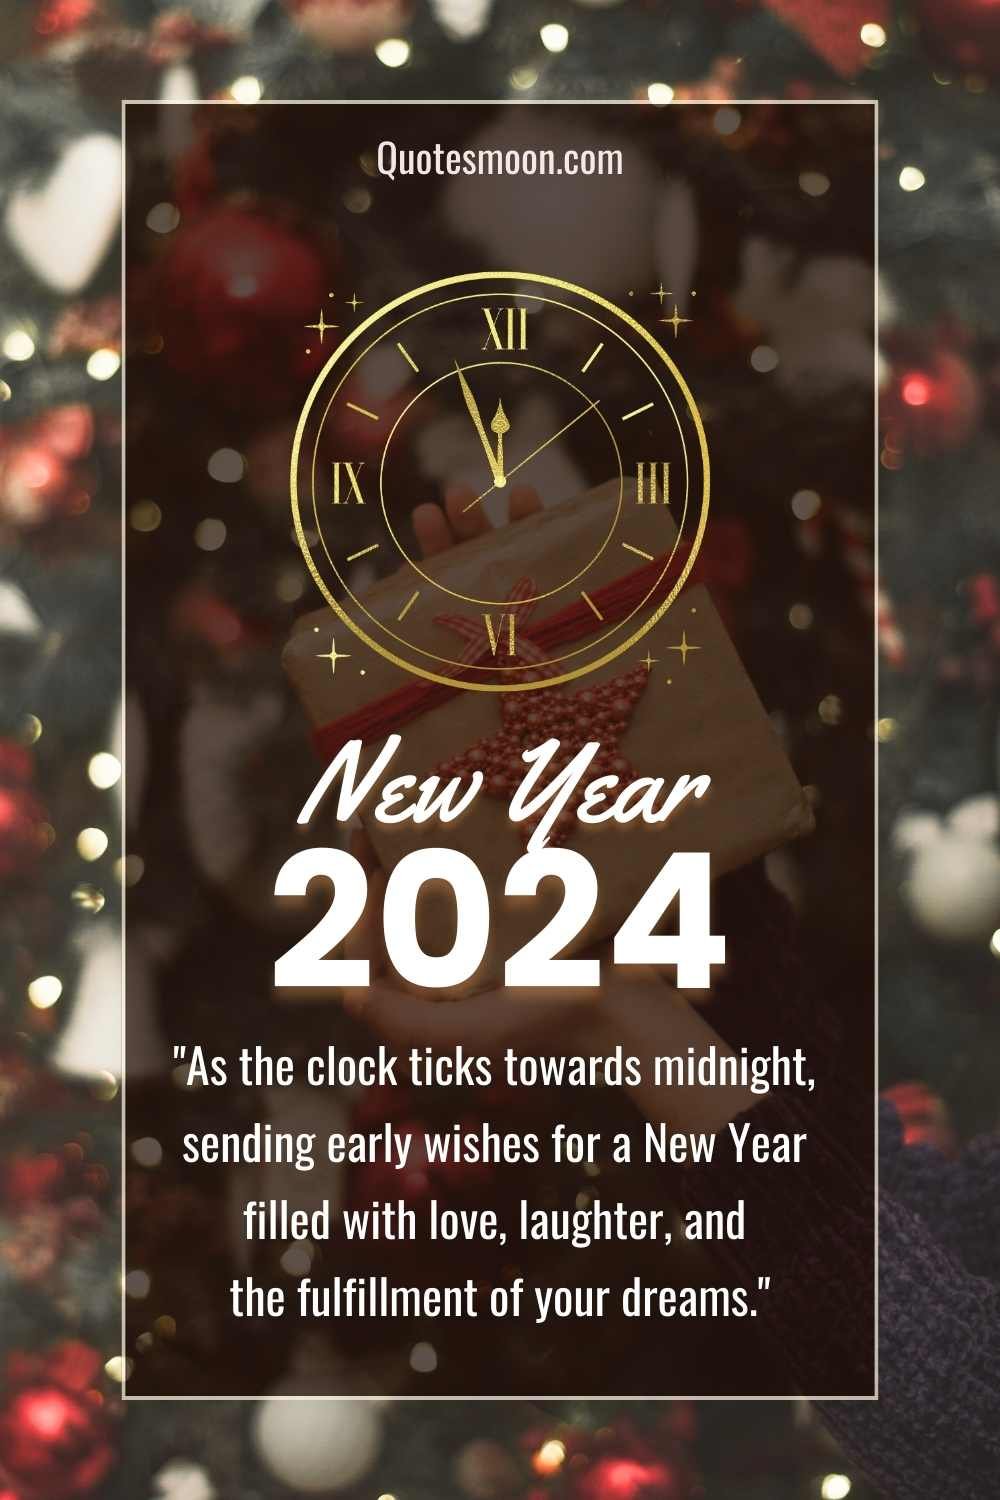 Advance HNY 2024 Wishes For New Year's Eve